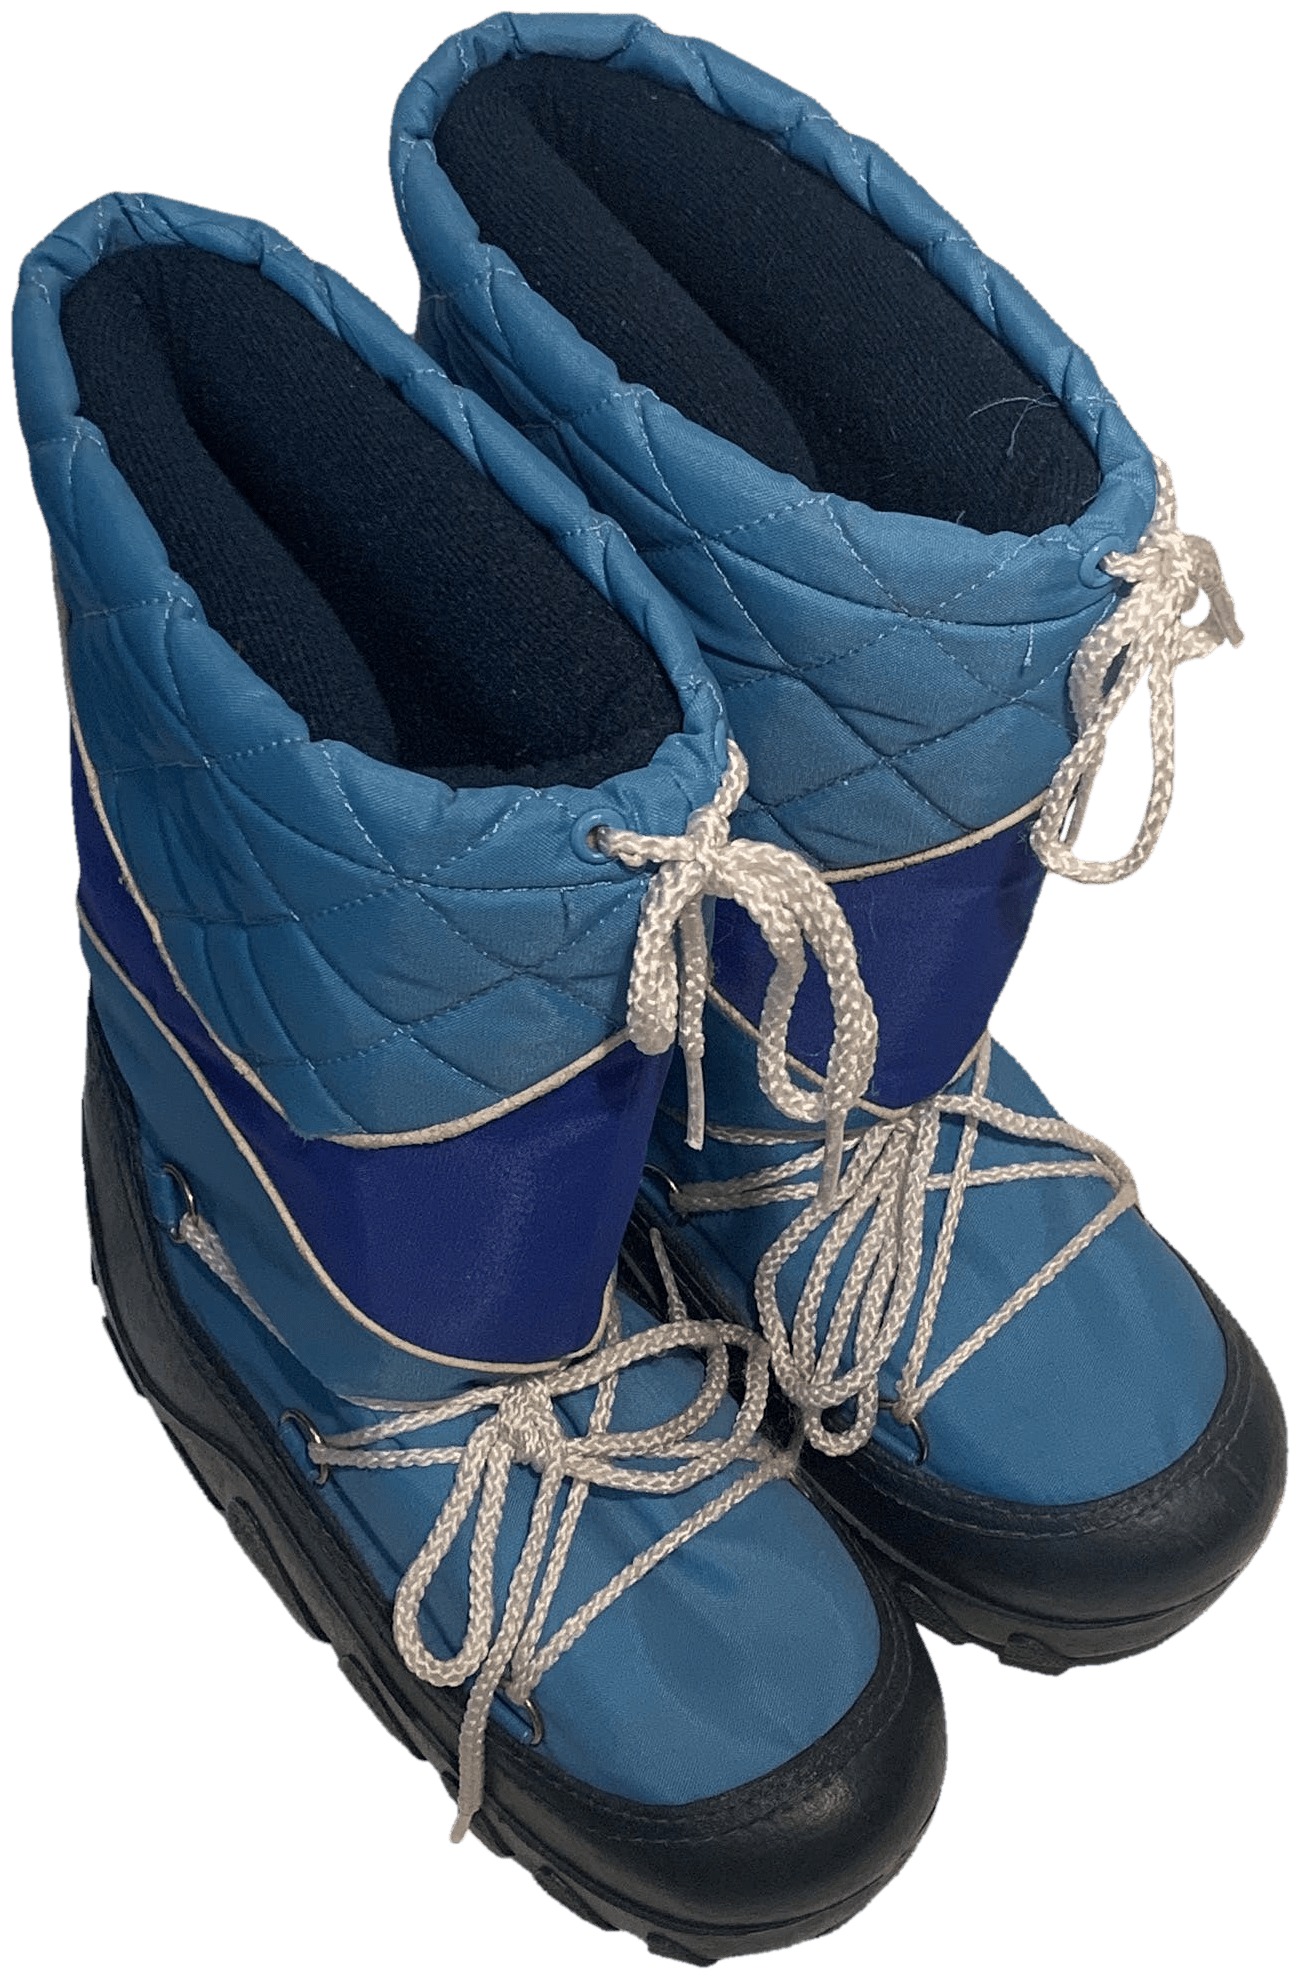 90's Moon Boots by Lasco – Thrilling